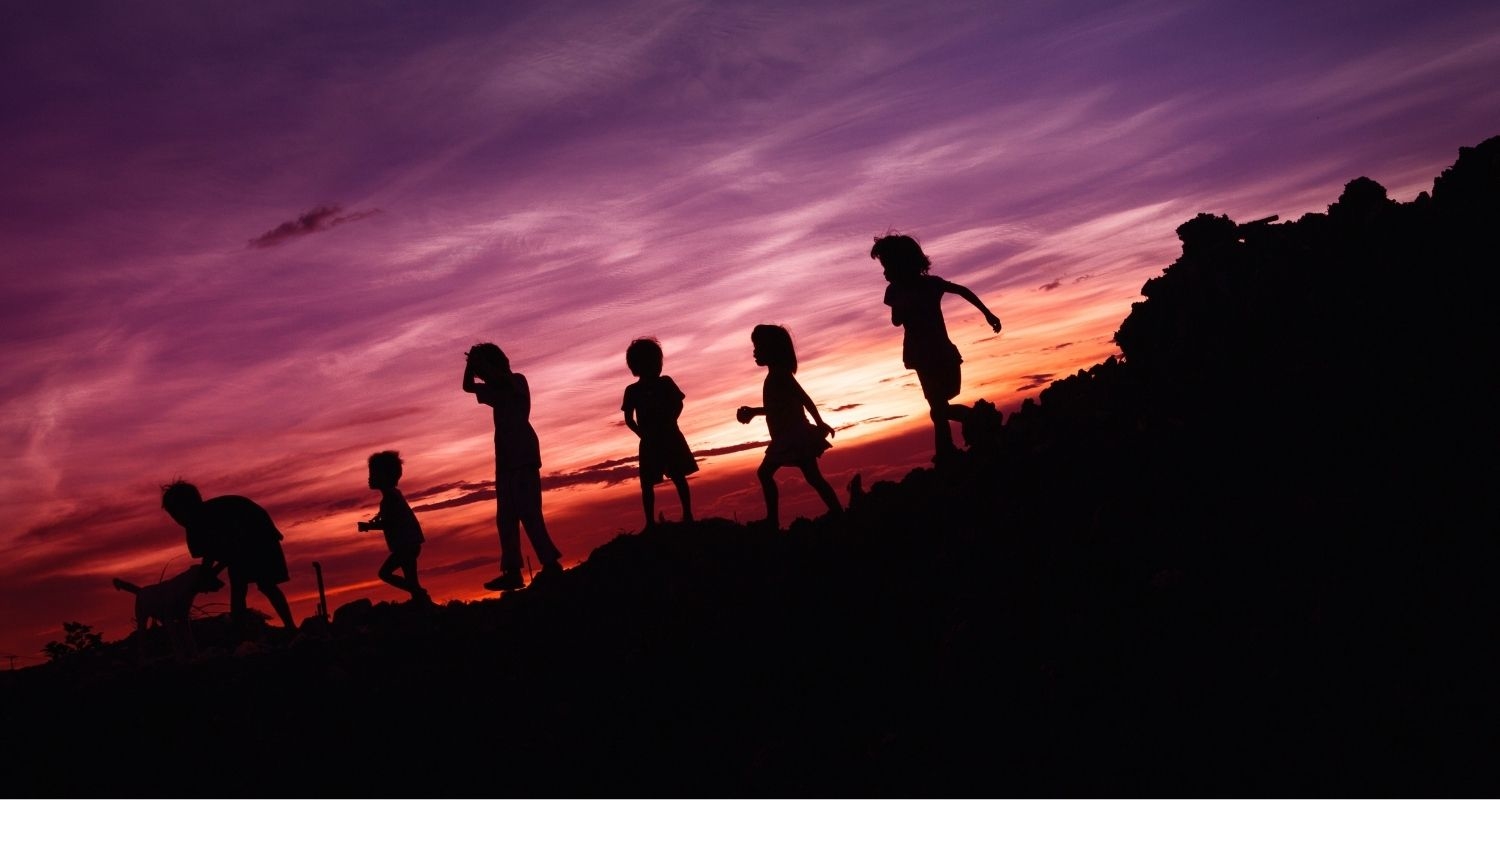 Kids playing at sunset - For Teens, Outdoor Recreation During the Pandemic Linked to Improved Well-Being - Forestry and Environmental Resources NC State University